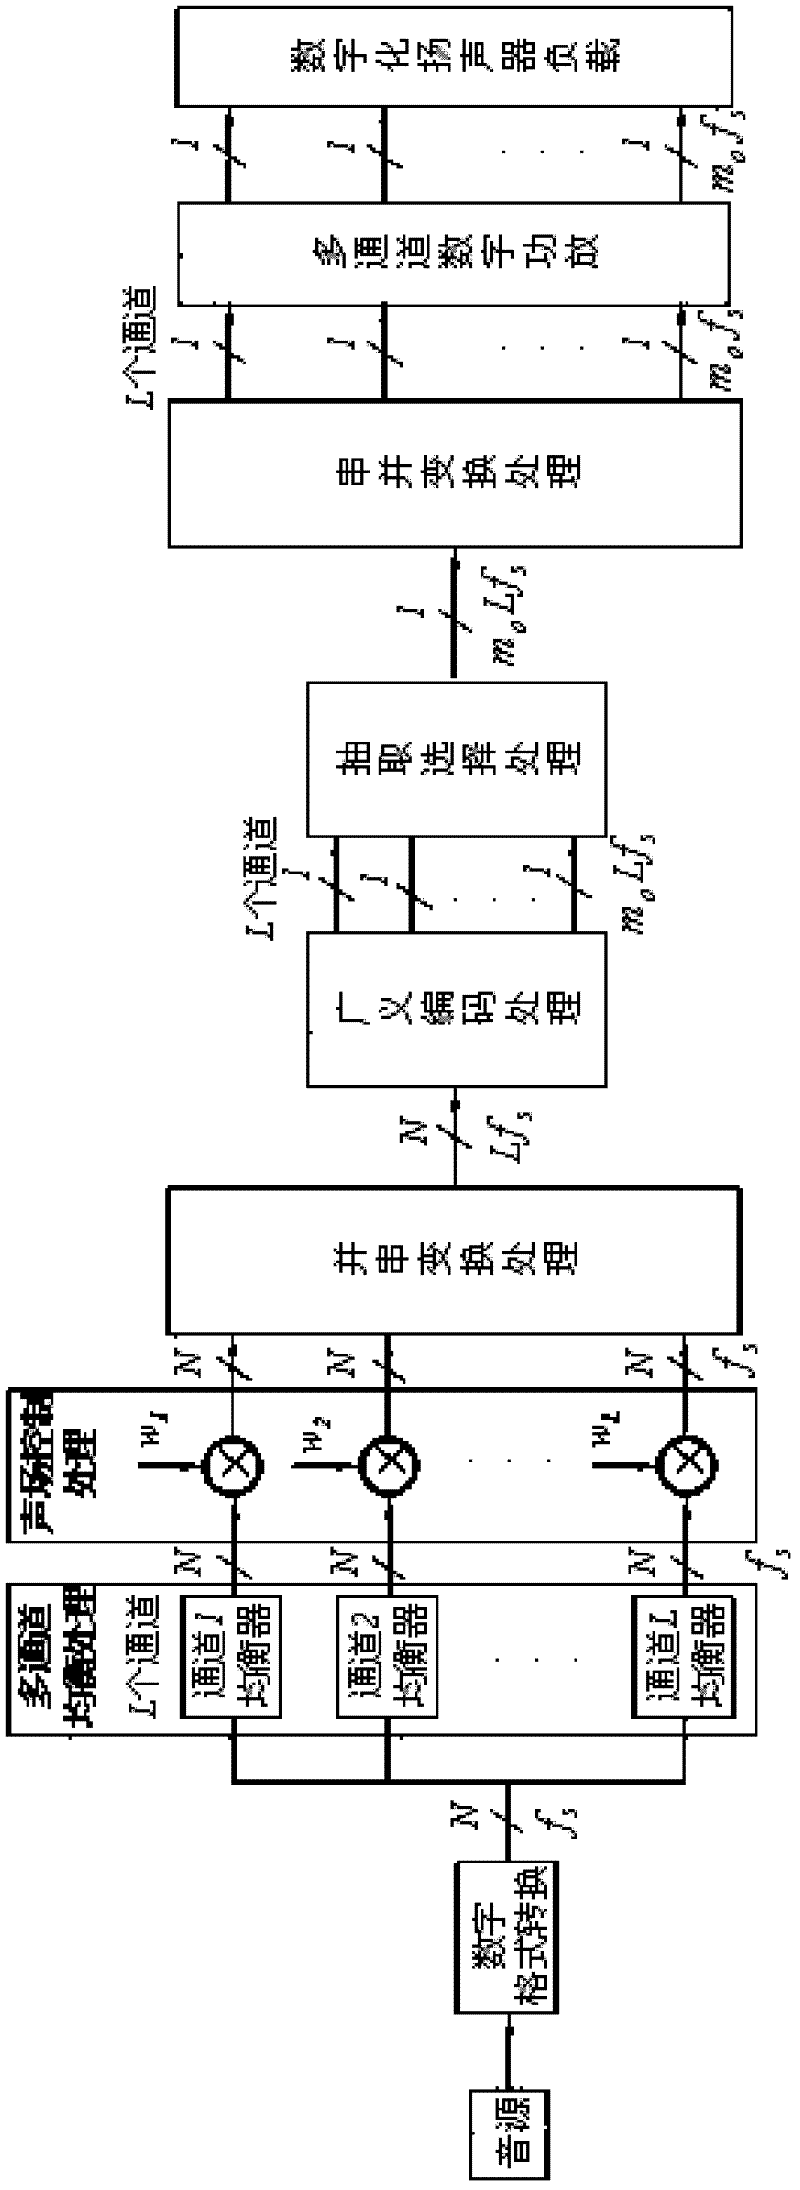 Channel balance and sound field control method and device of digitalized speaker system